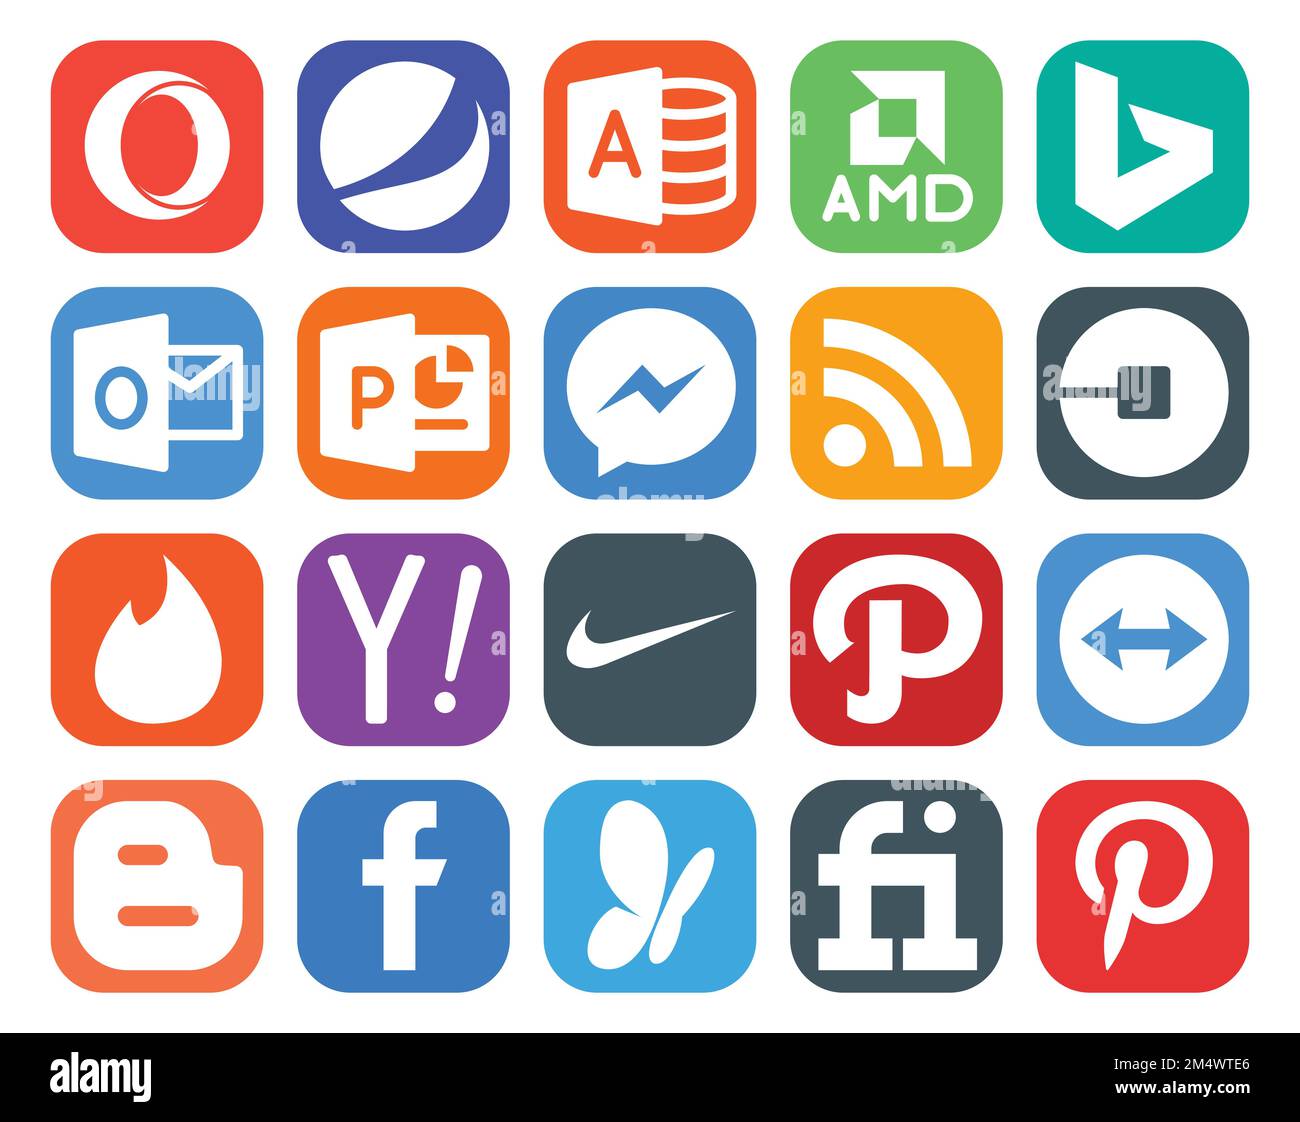 20 Social Media Icon Pack Including teamviewer. nike. rss. search. tinder Stock Vector